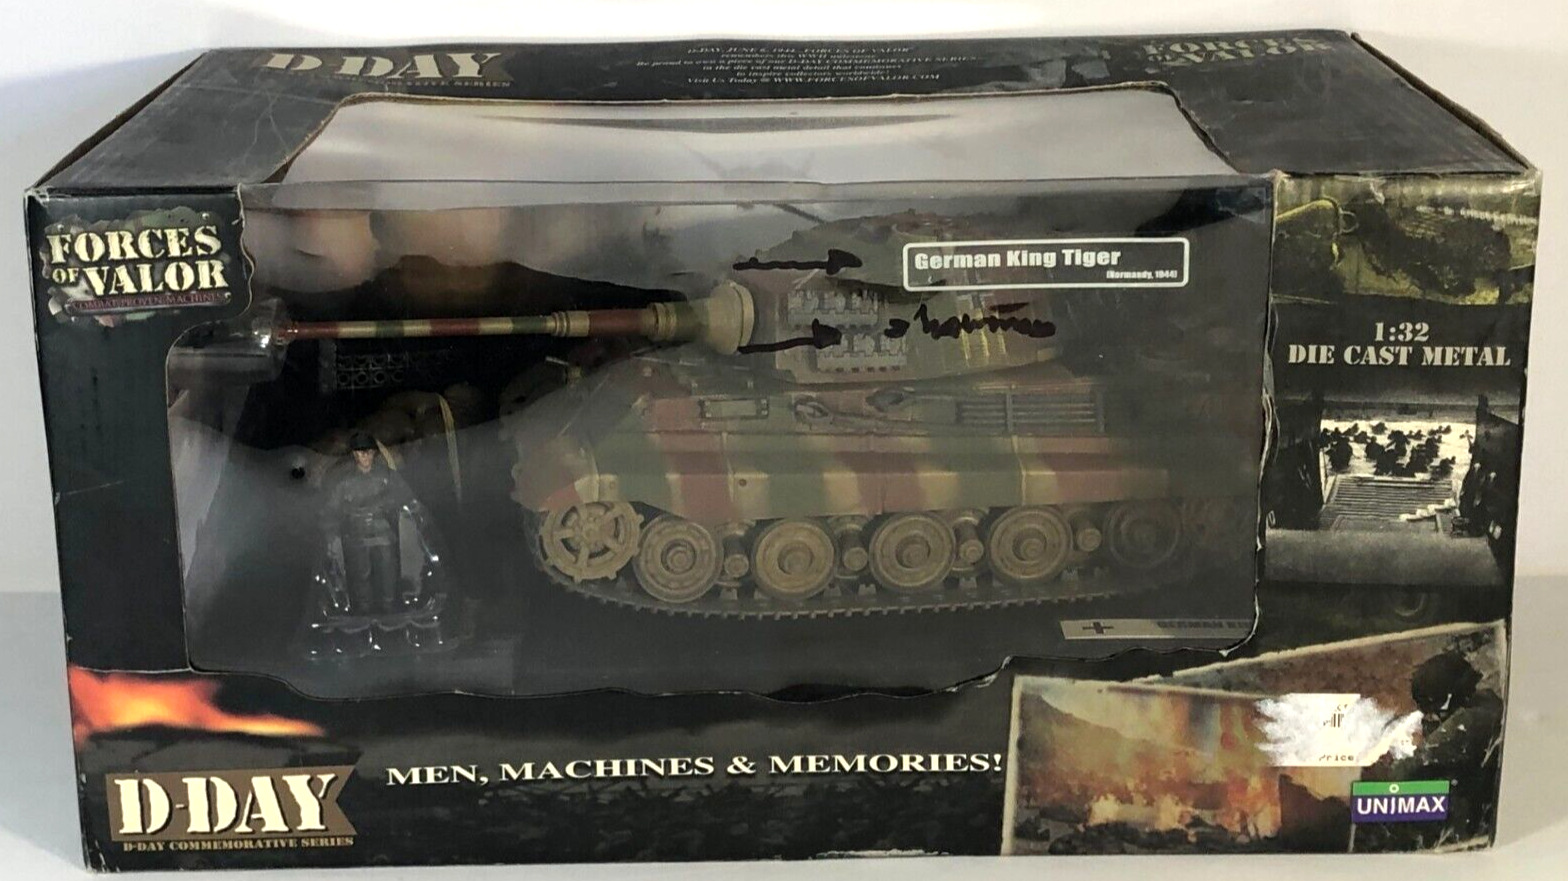 Unimax Forces of Valor 1:32 German King Tiger, Normandy 1944, No. 80601